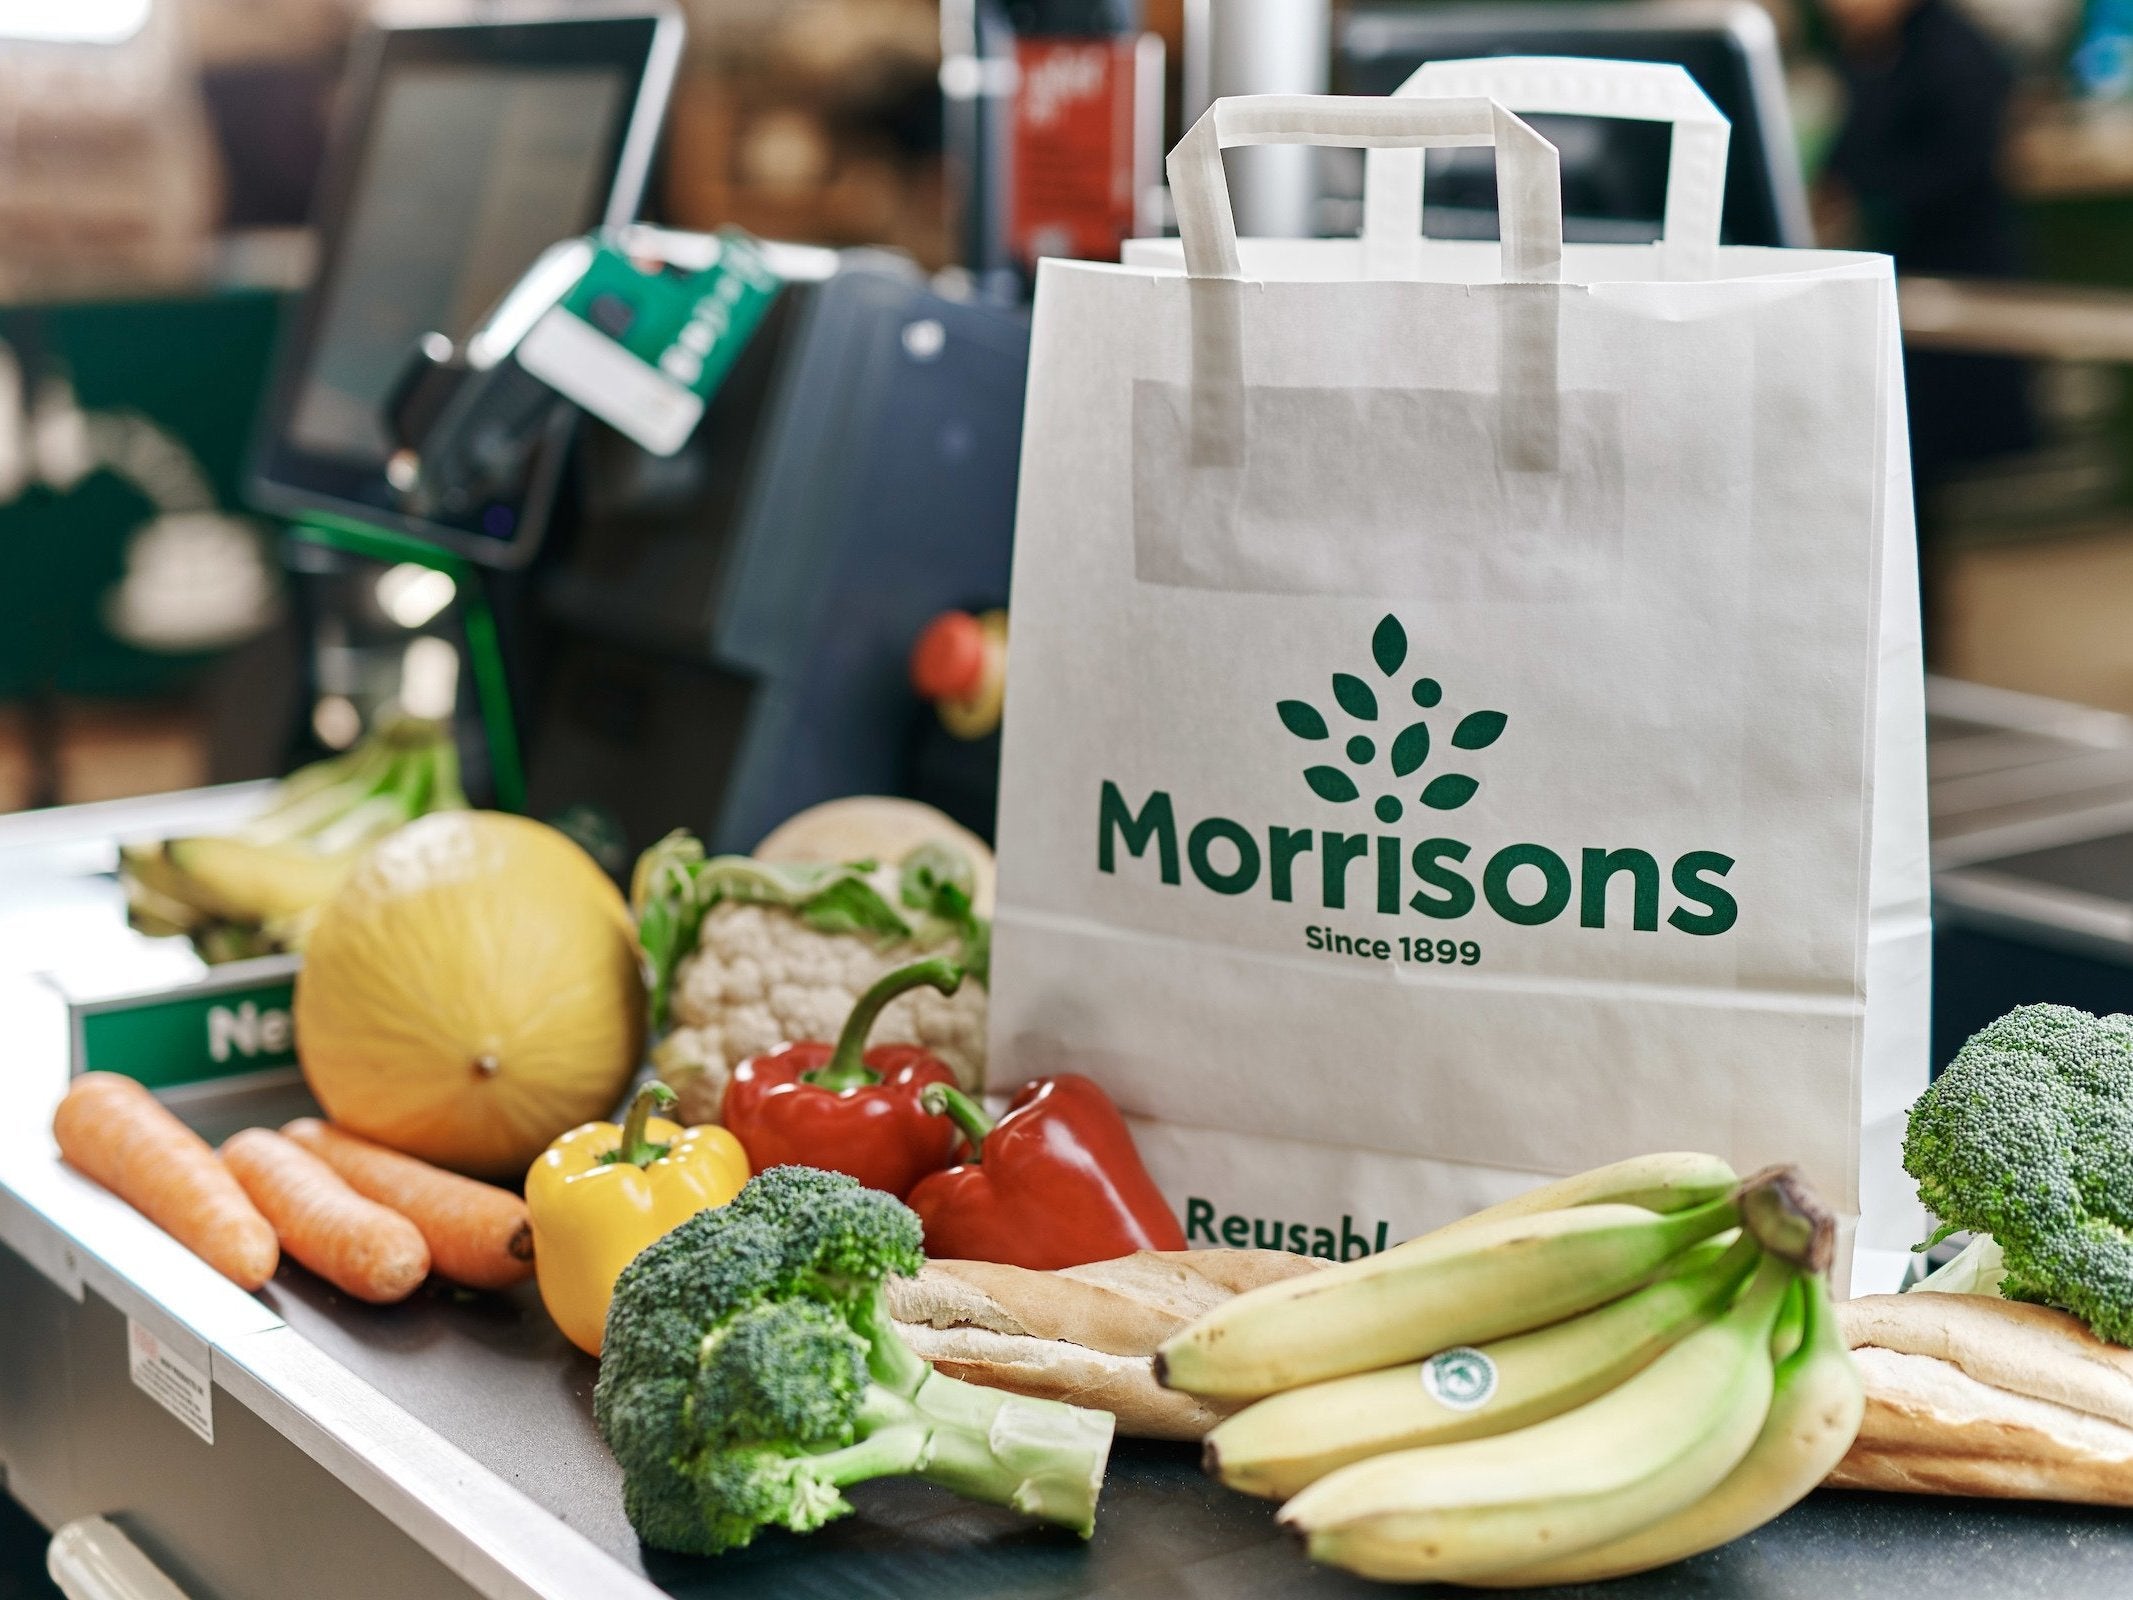 More shop workers at Morrisons have filed equal pay claim against the supermarket group